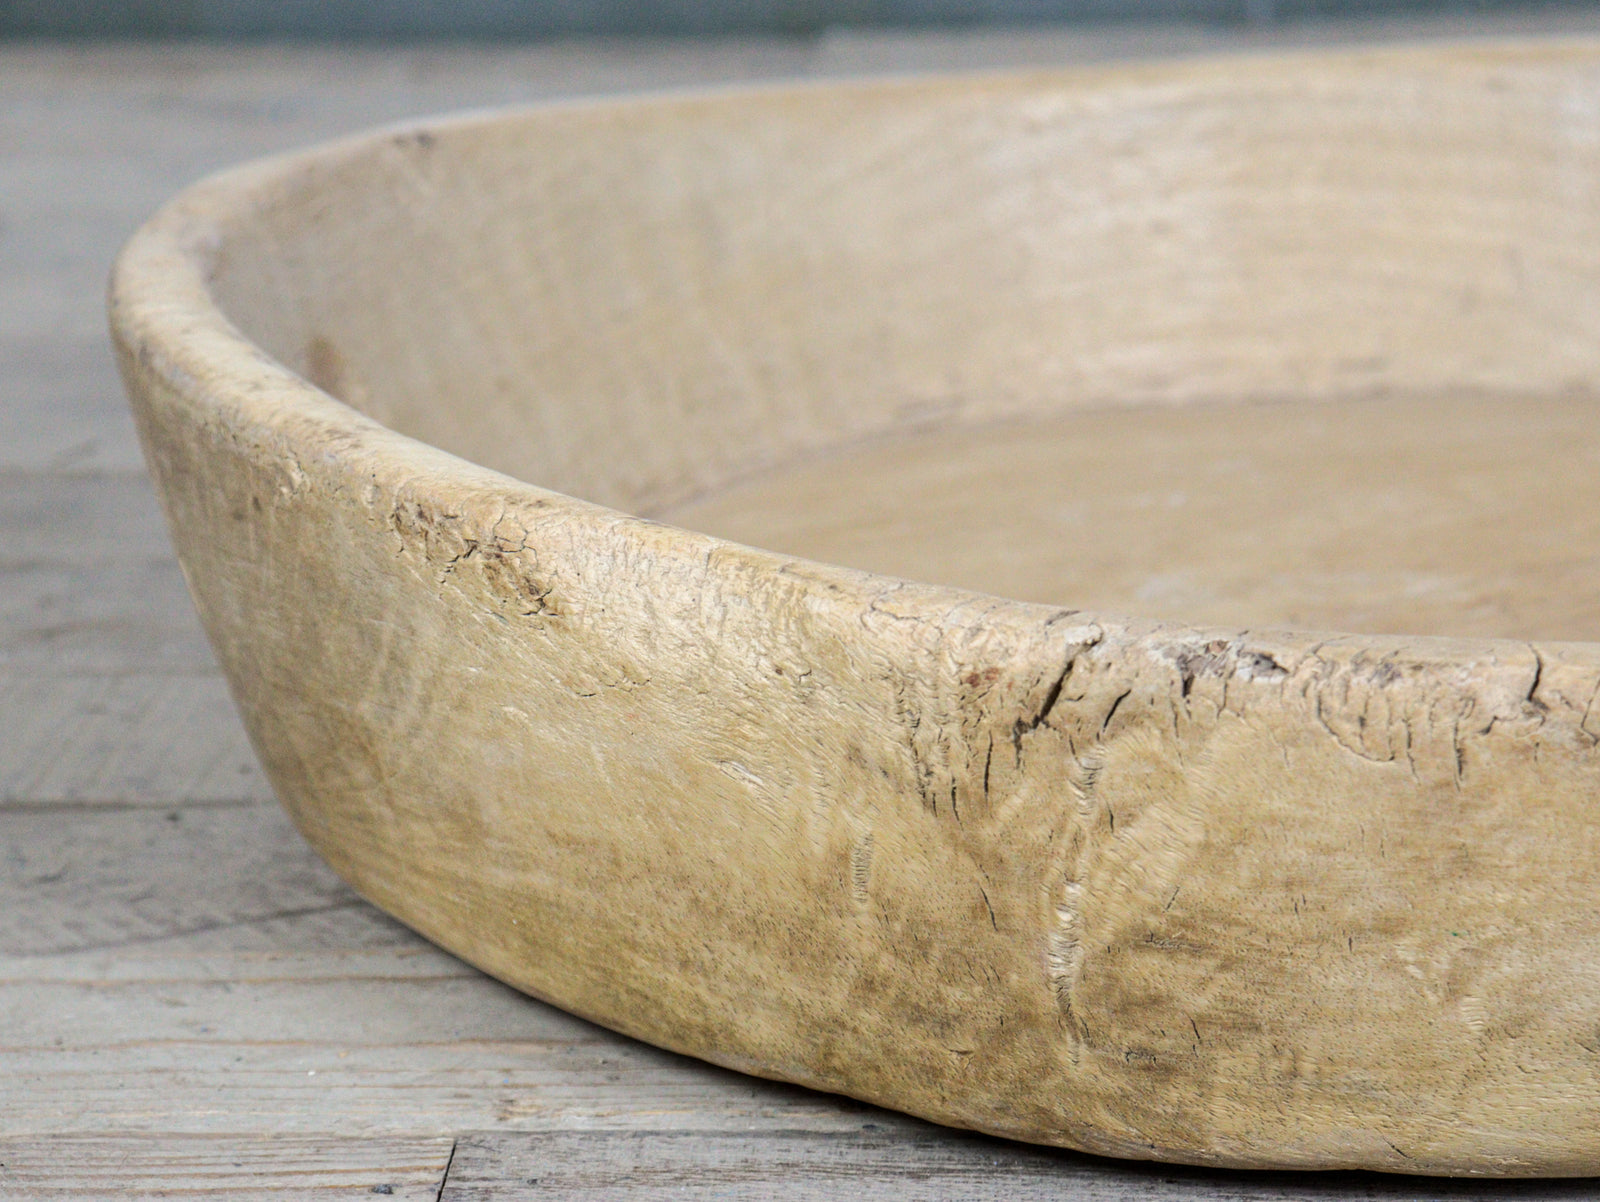 MILL-1037/2 Large Bleached Wooden Bowl C22